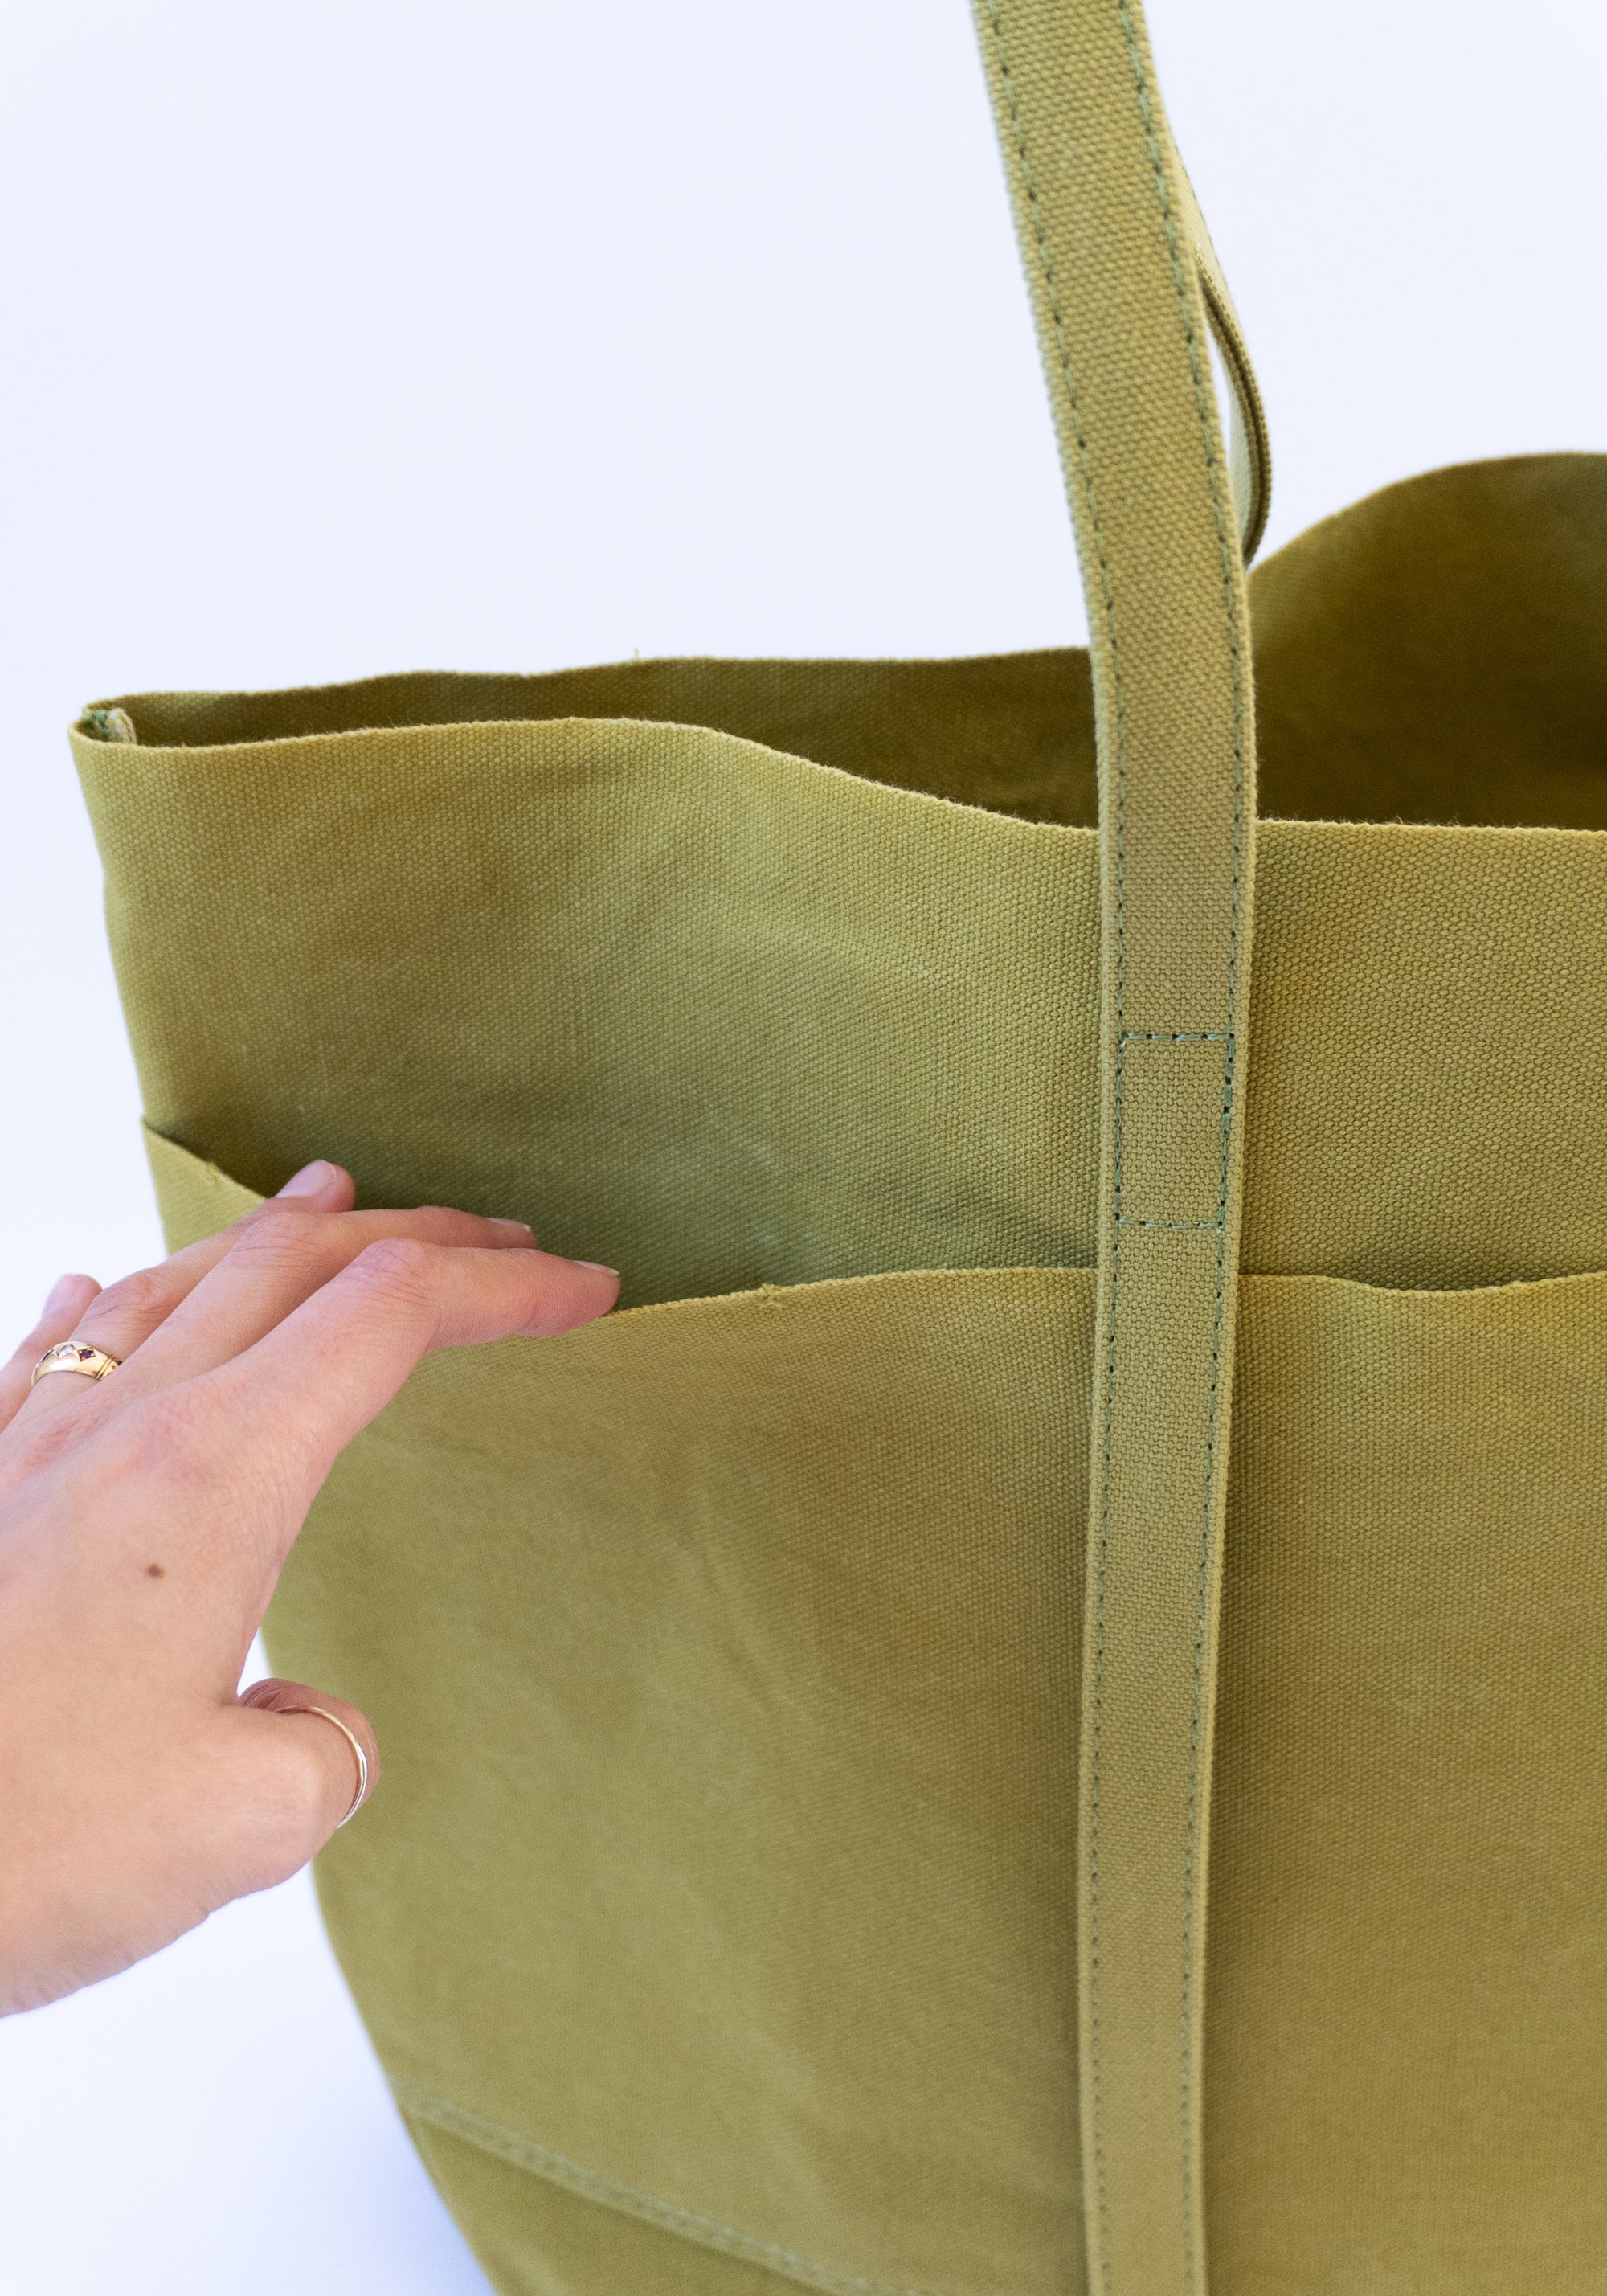 Amiacalva Washed Canvas 6 Pocket Tote in Lime